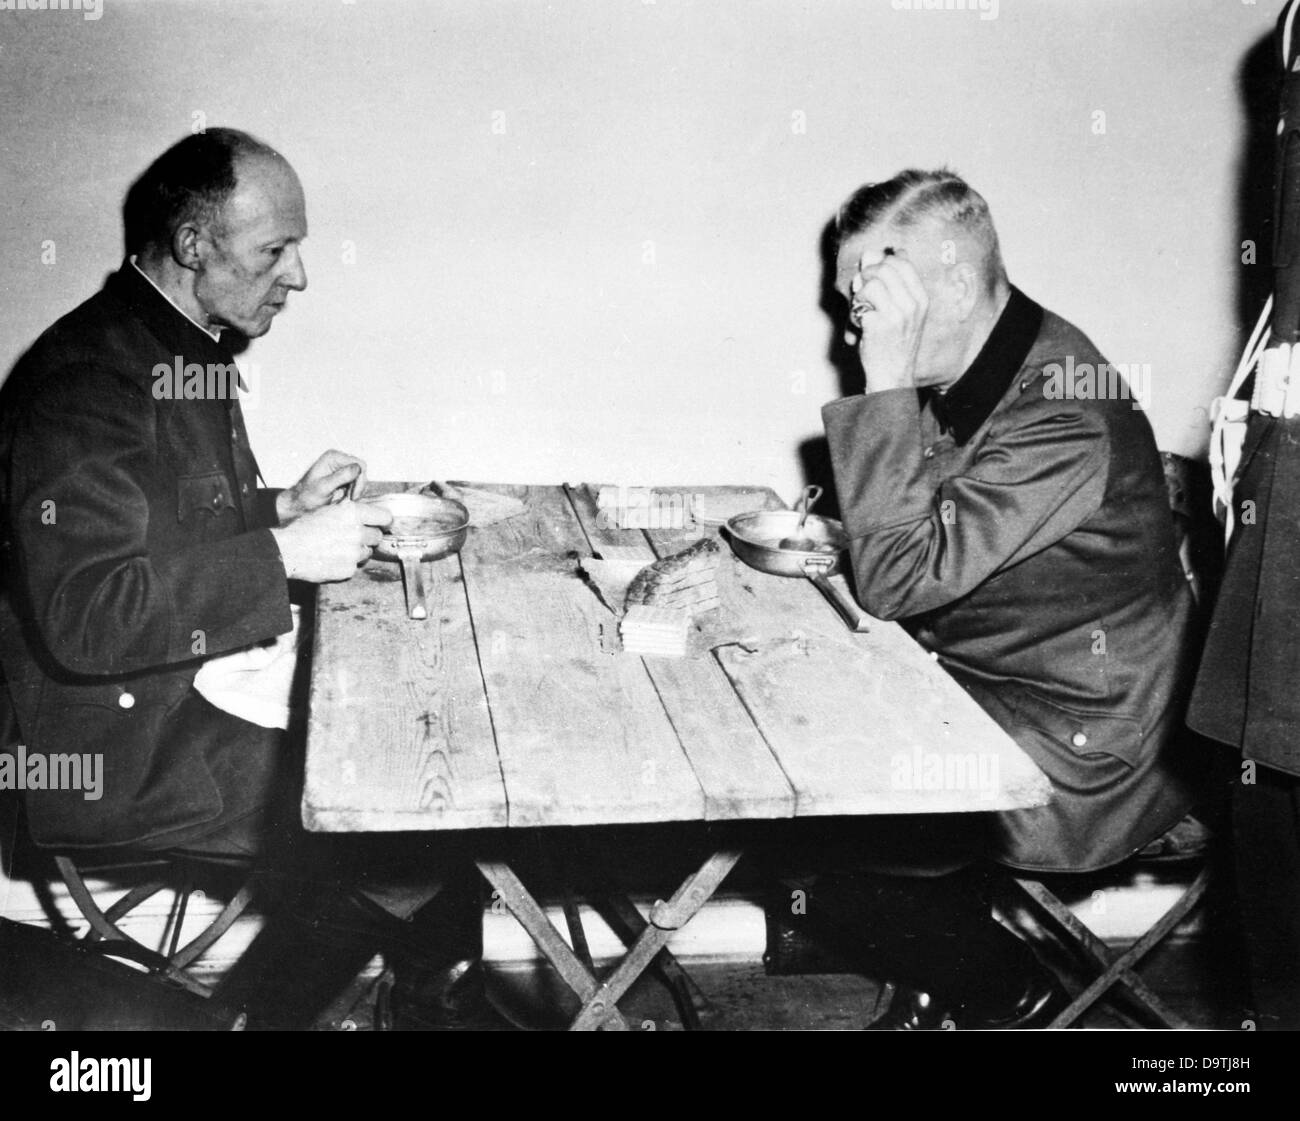 Wilhelm Keitel (r), head of the Supreme Command of the German Wehrmacht (OKW), and Ernst Kaltenbrunner (l), Chief of the Reich Main Security Office and President of the Interpol, - two of the major Nazi war criminals tried in the Nuremberg Trials in the context of the International Military Tribunal - eat soup and bread in a prison in Nuremberg, Germany, in 1946. Both were found guilty and sentenced to death. Photo: Yevgeny Khaldei Stock Photo